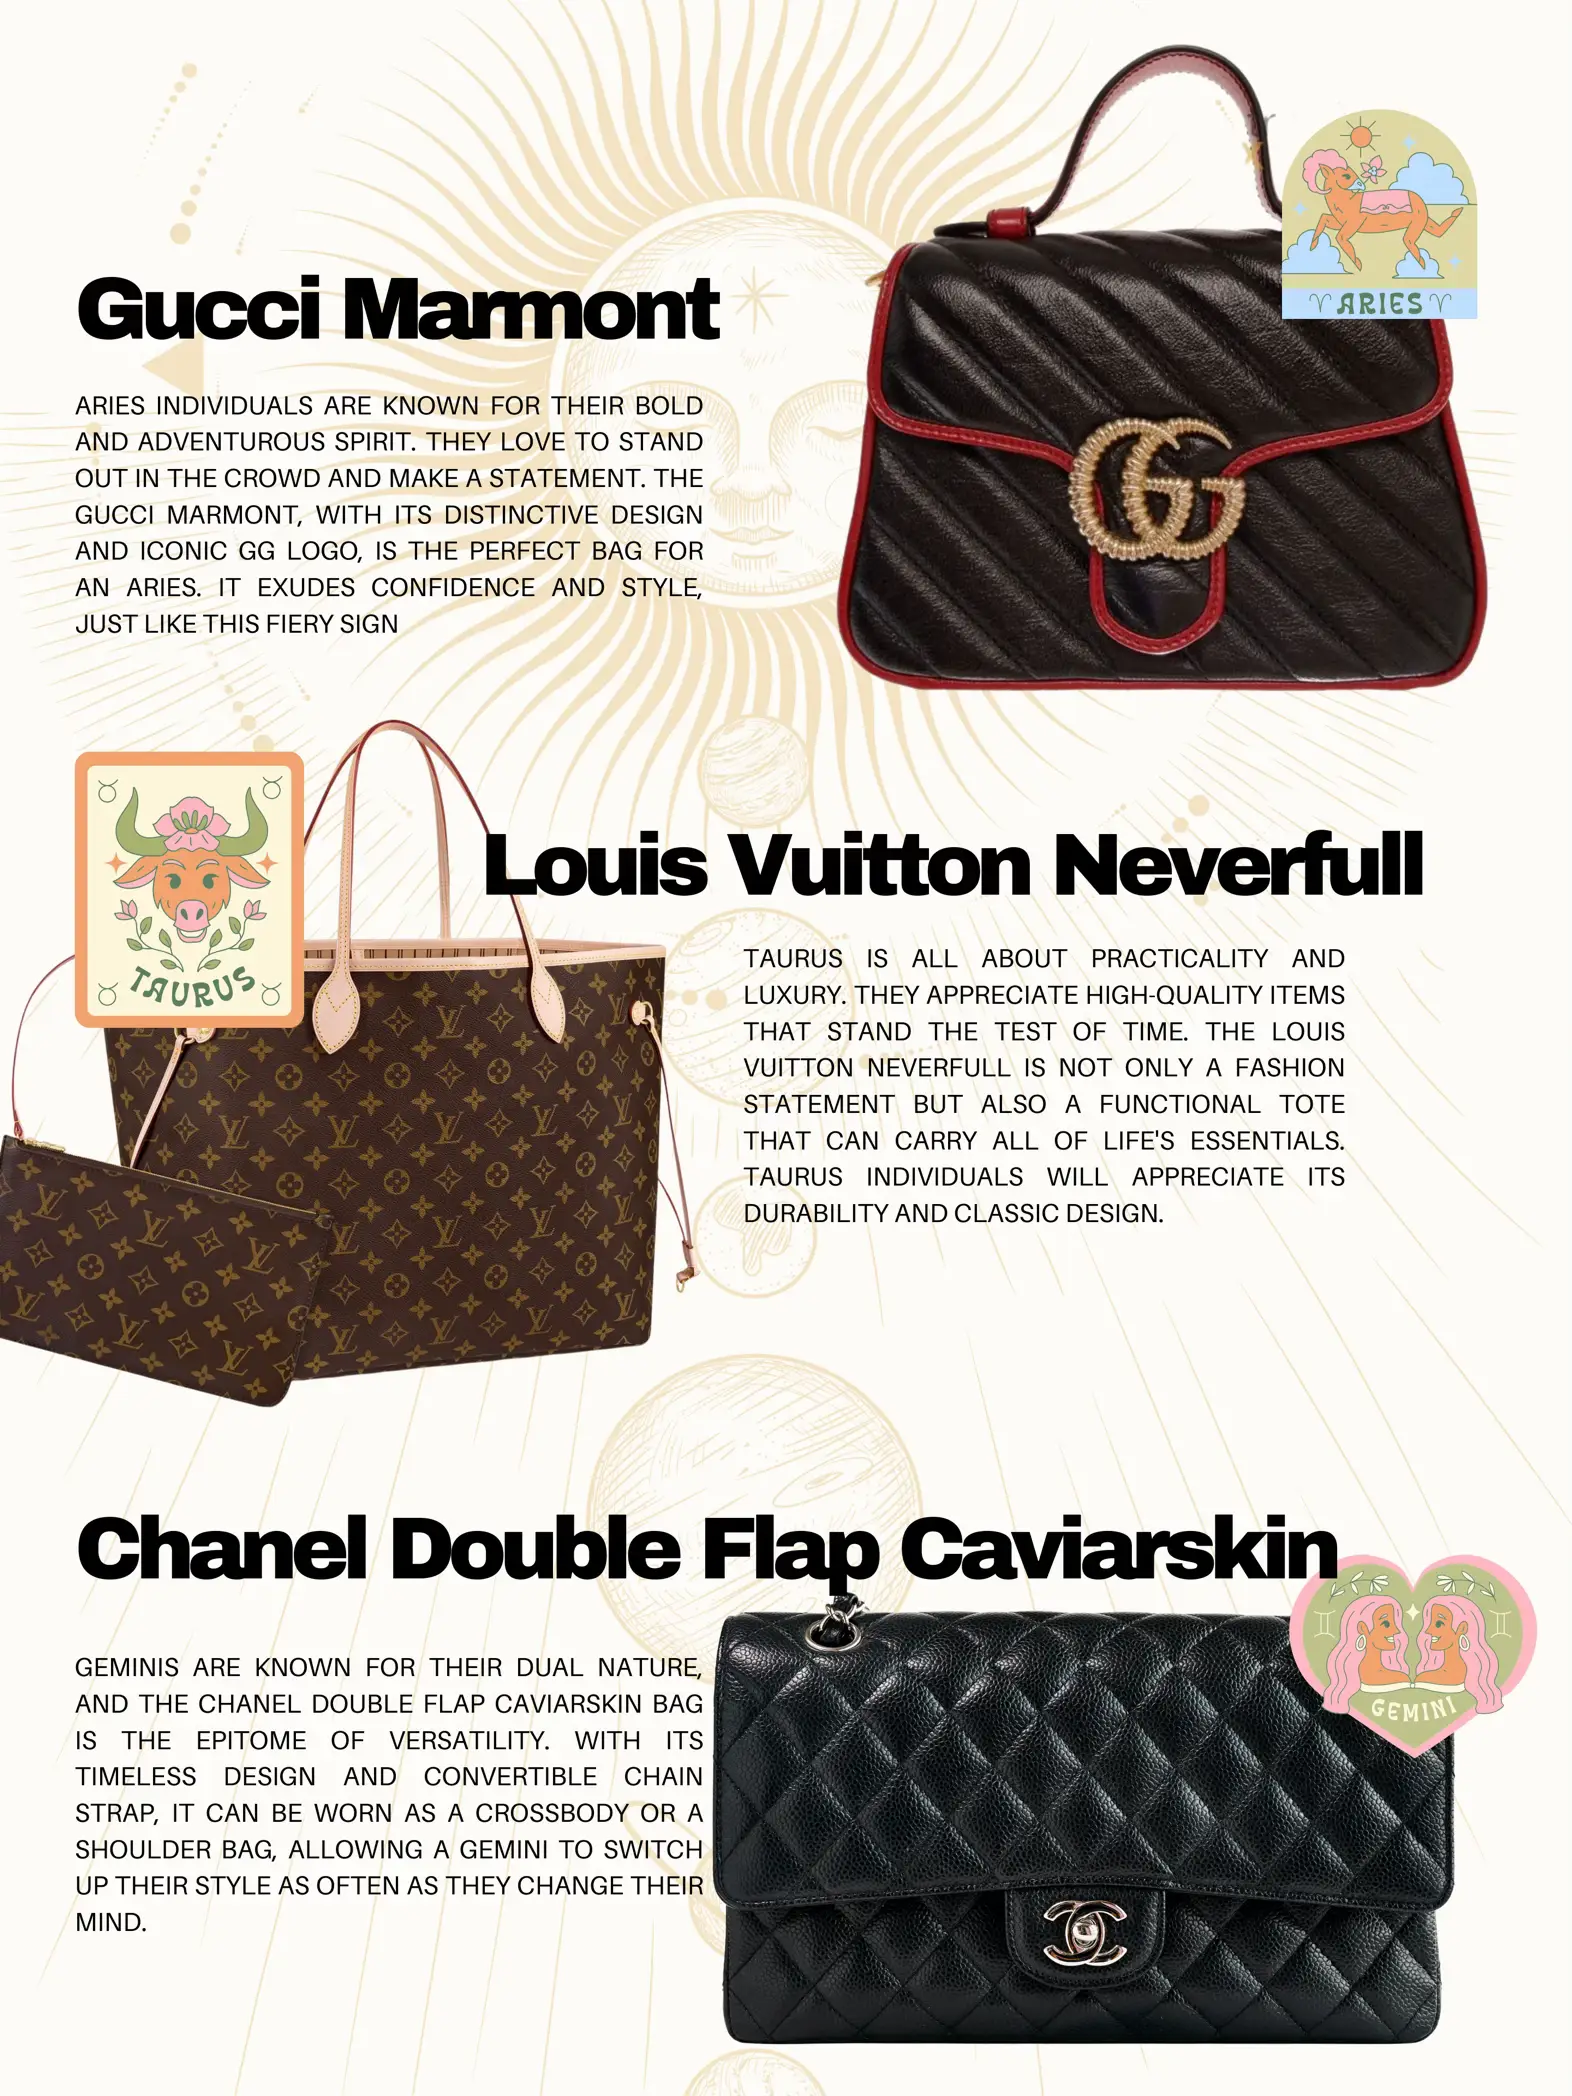 Luxury Bags According to Your Zodiac Sign, Gallery posted by Natasshanjani